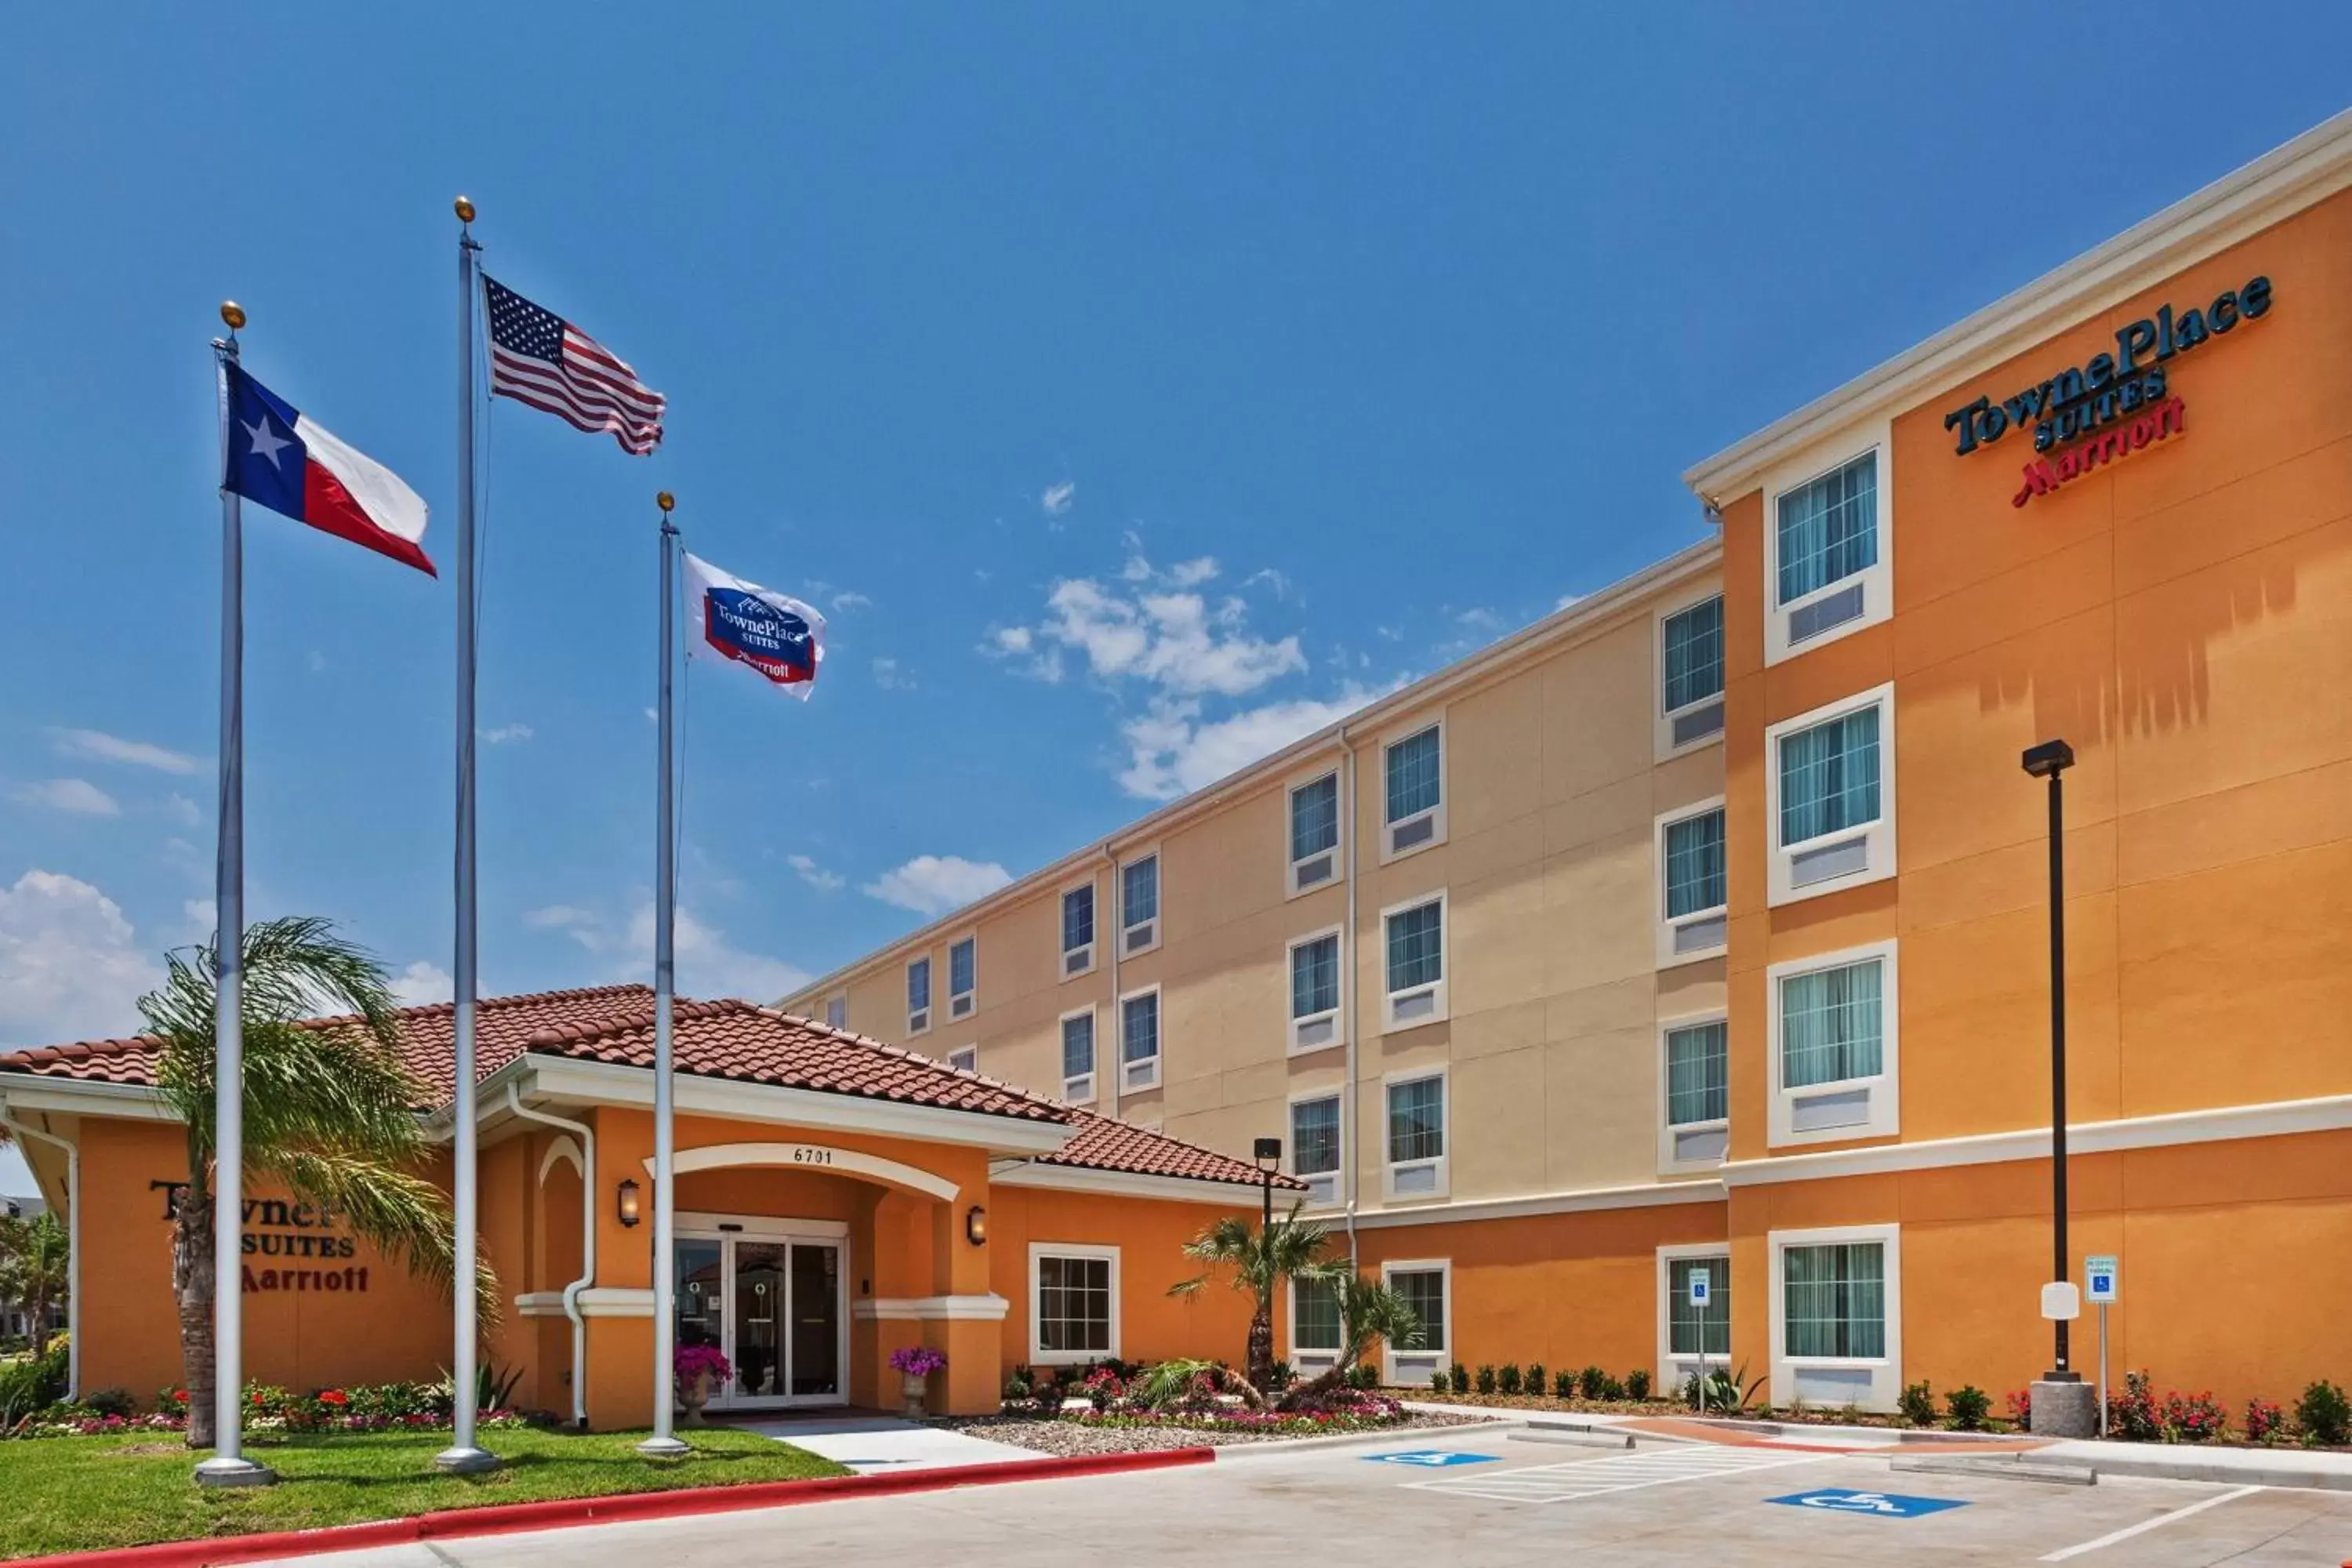 Property Building in TownePlace Suites by Marriott Corpus Christi